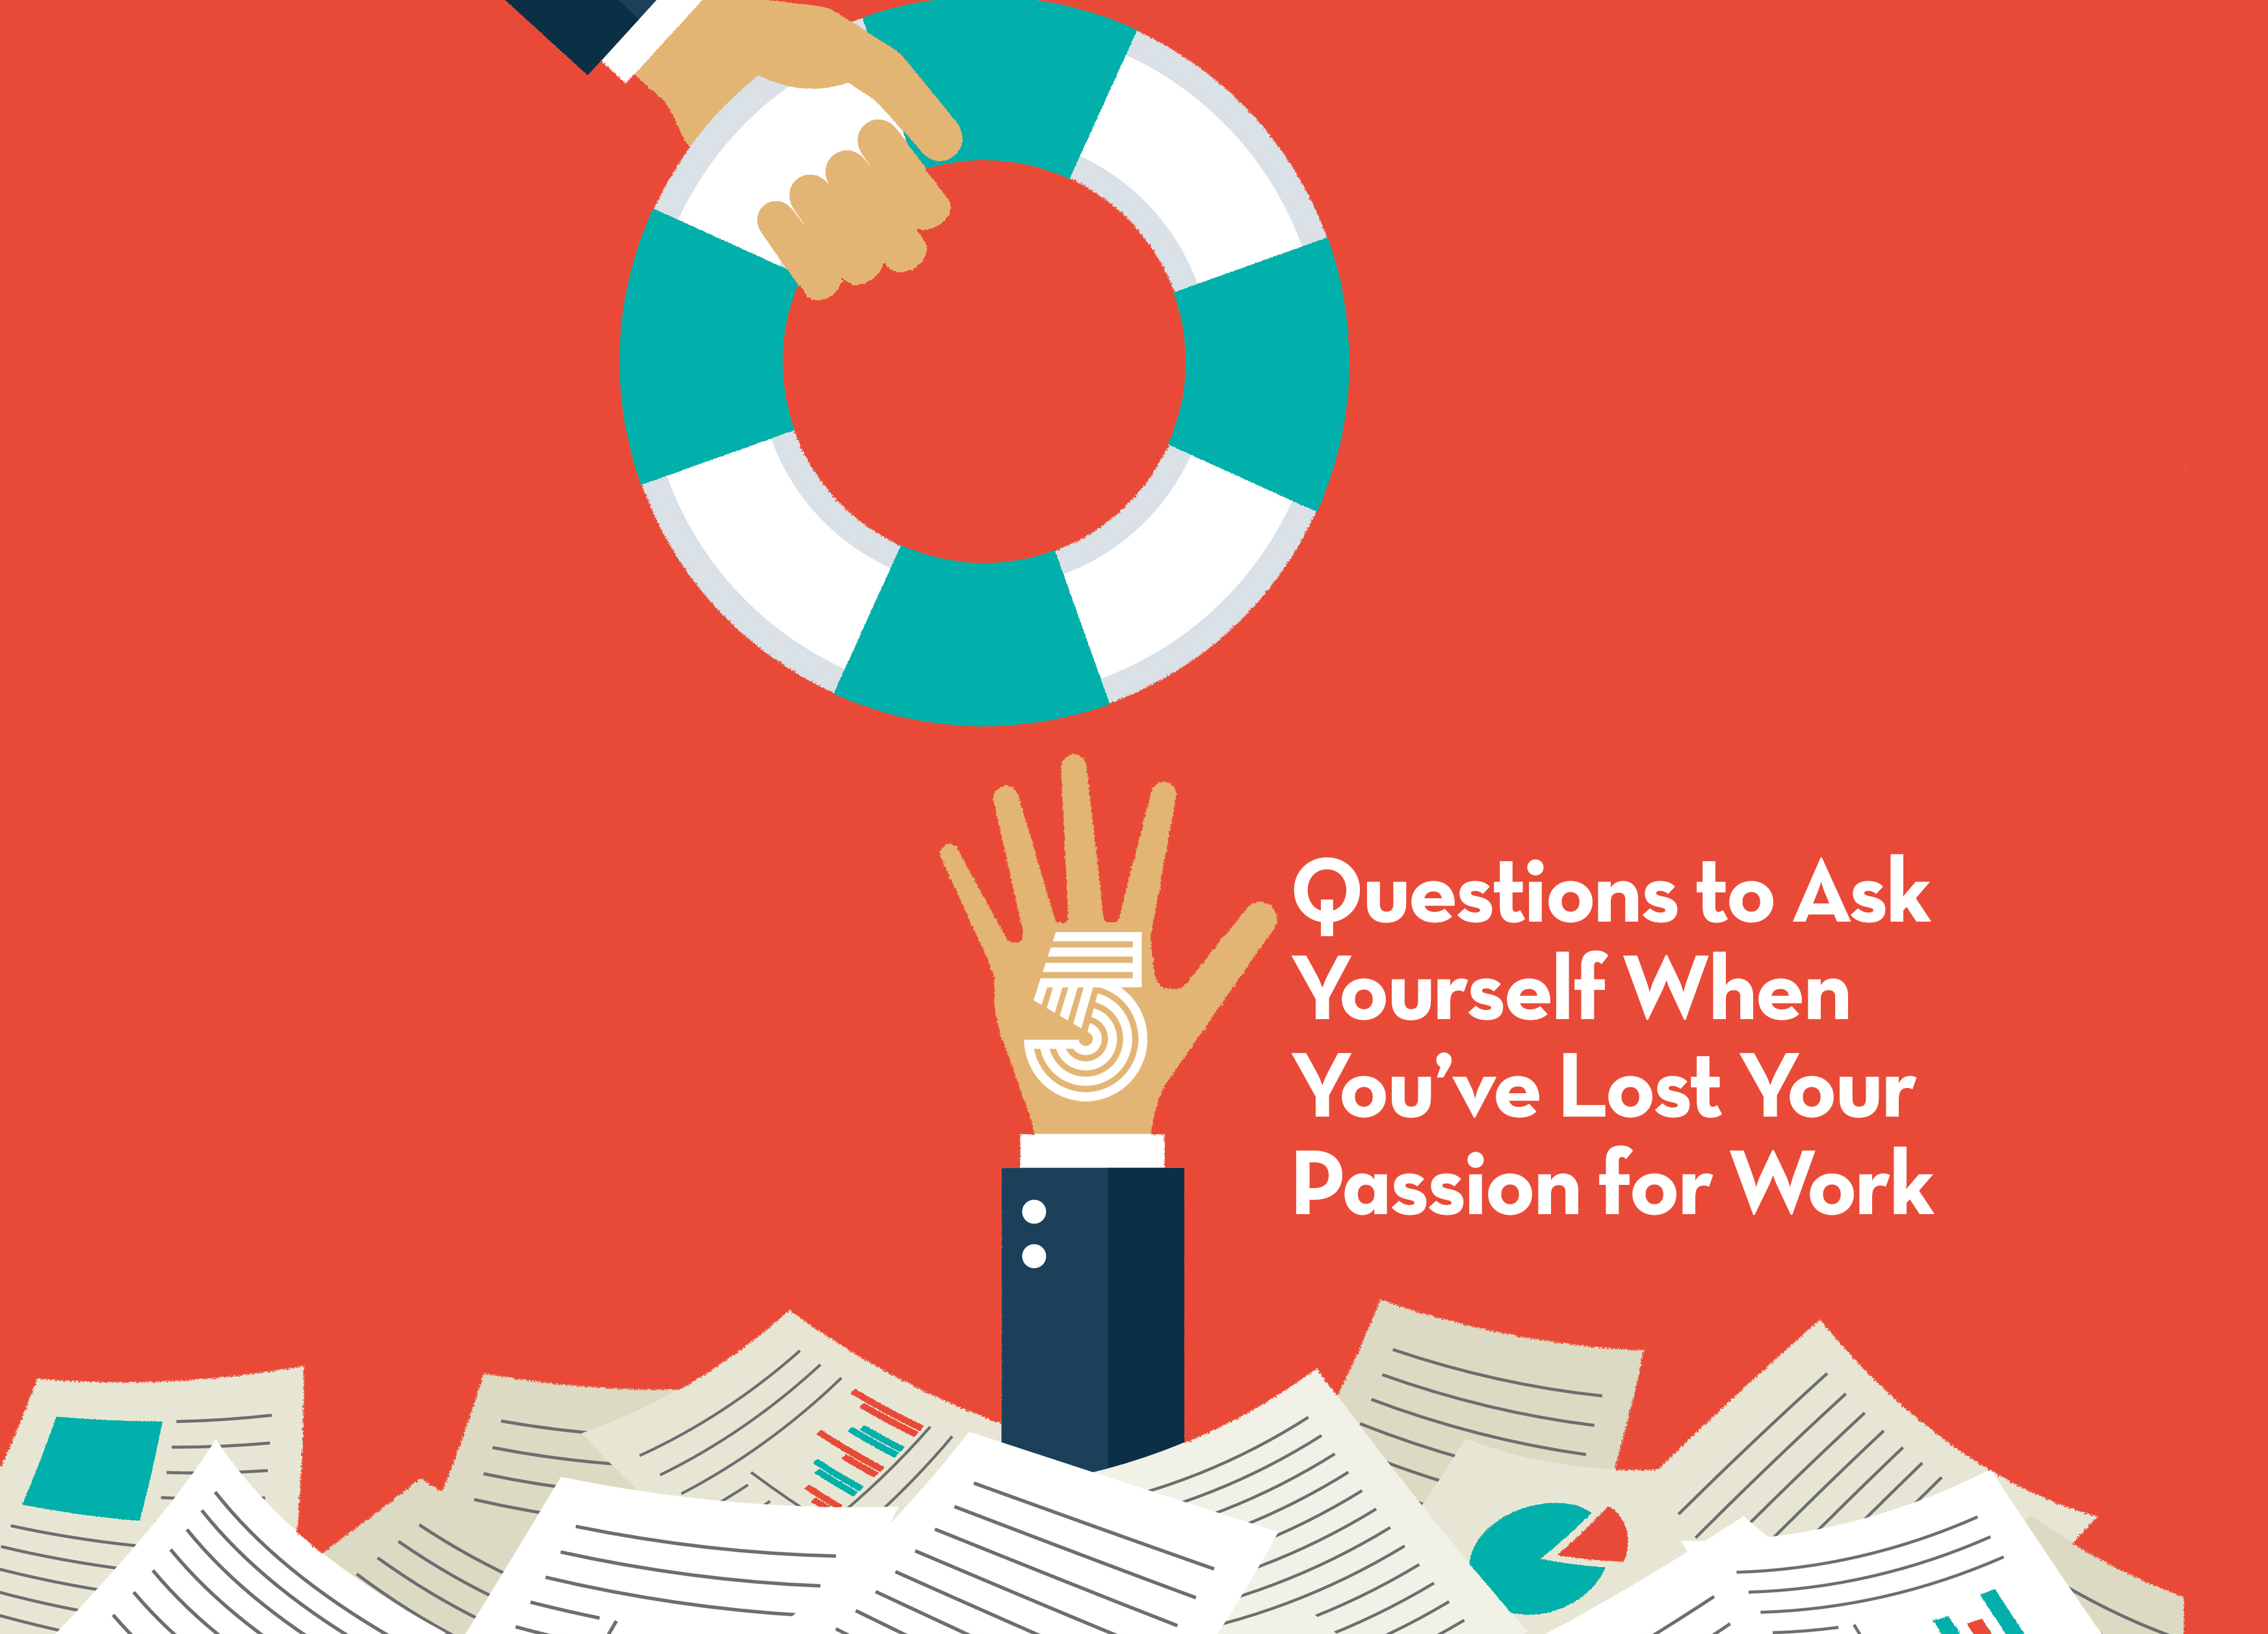 Follow Your Passion Really Is Good Advice: 3 Ways To Fuel Your Career